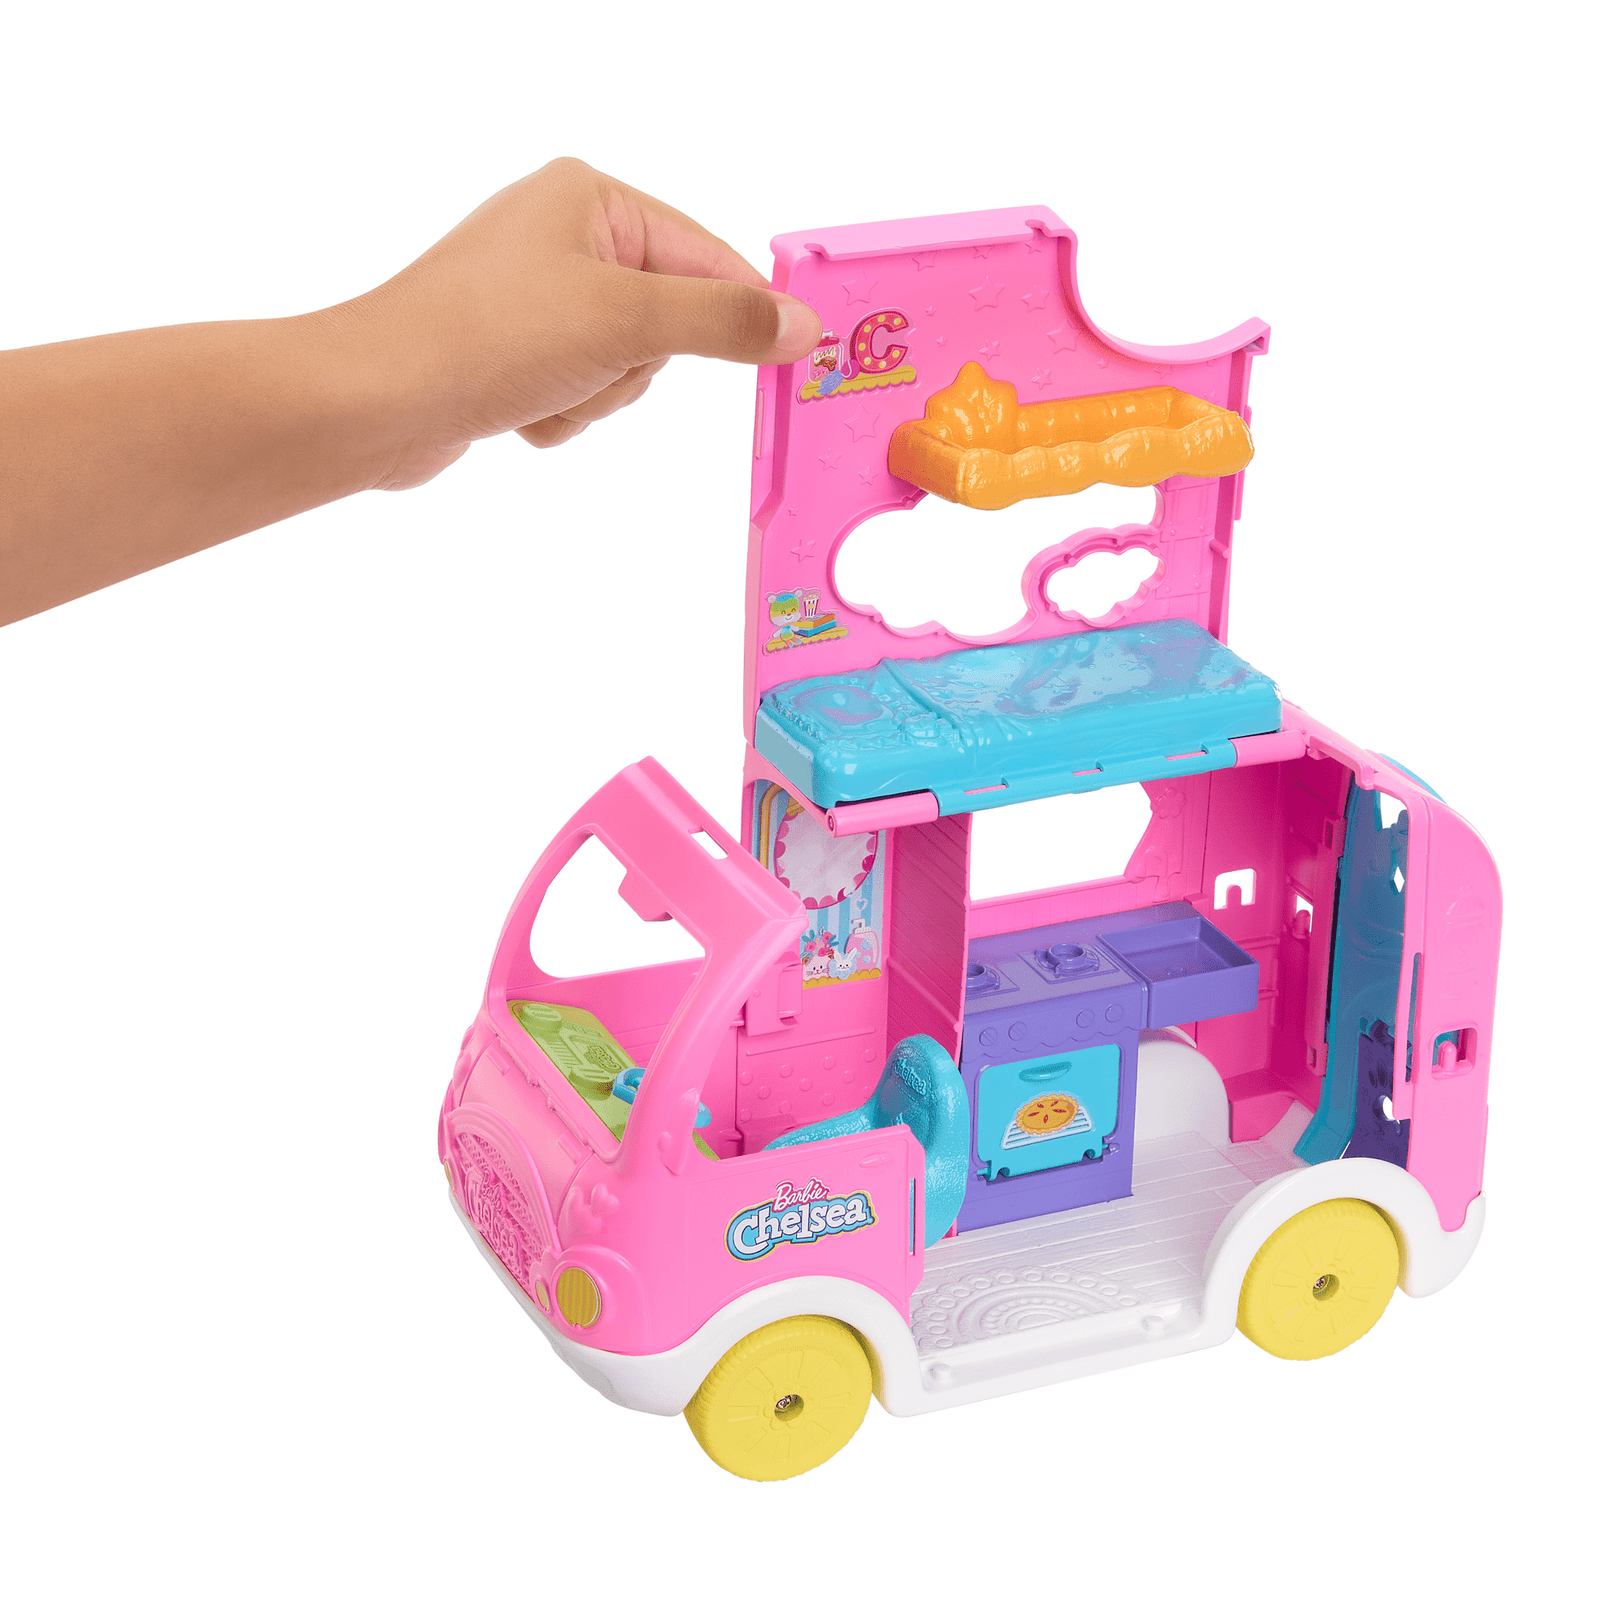 Barbie Camper Chelsea 2-in-1 Playset with Small Doll